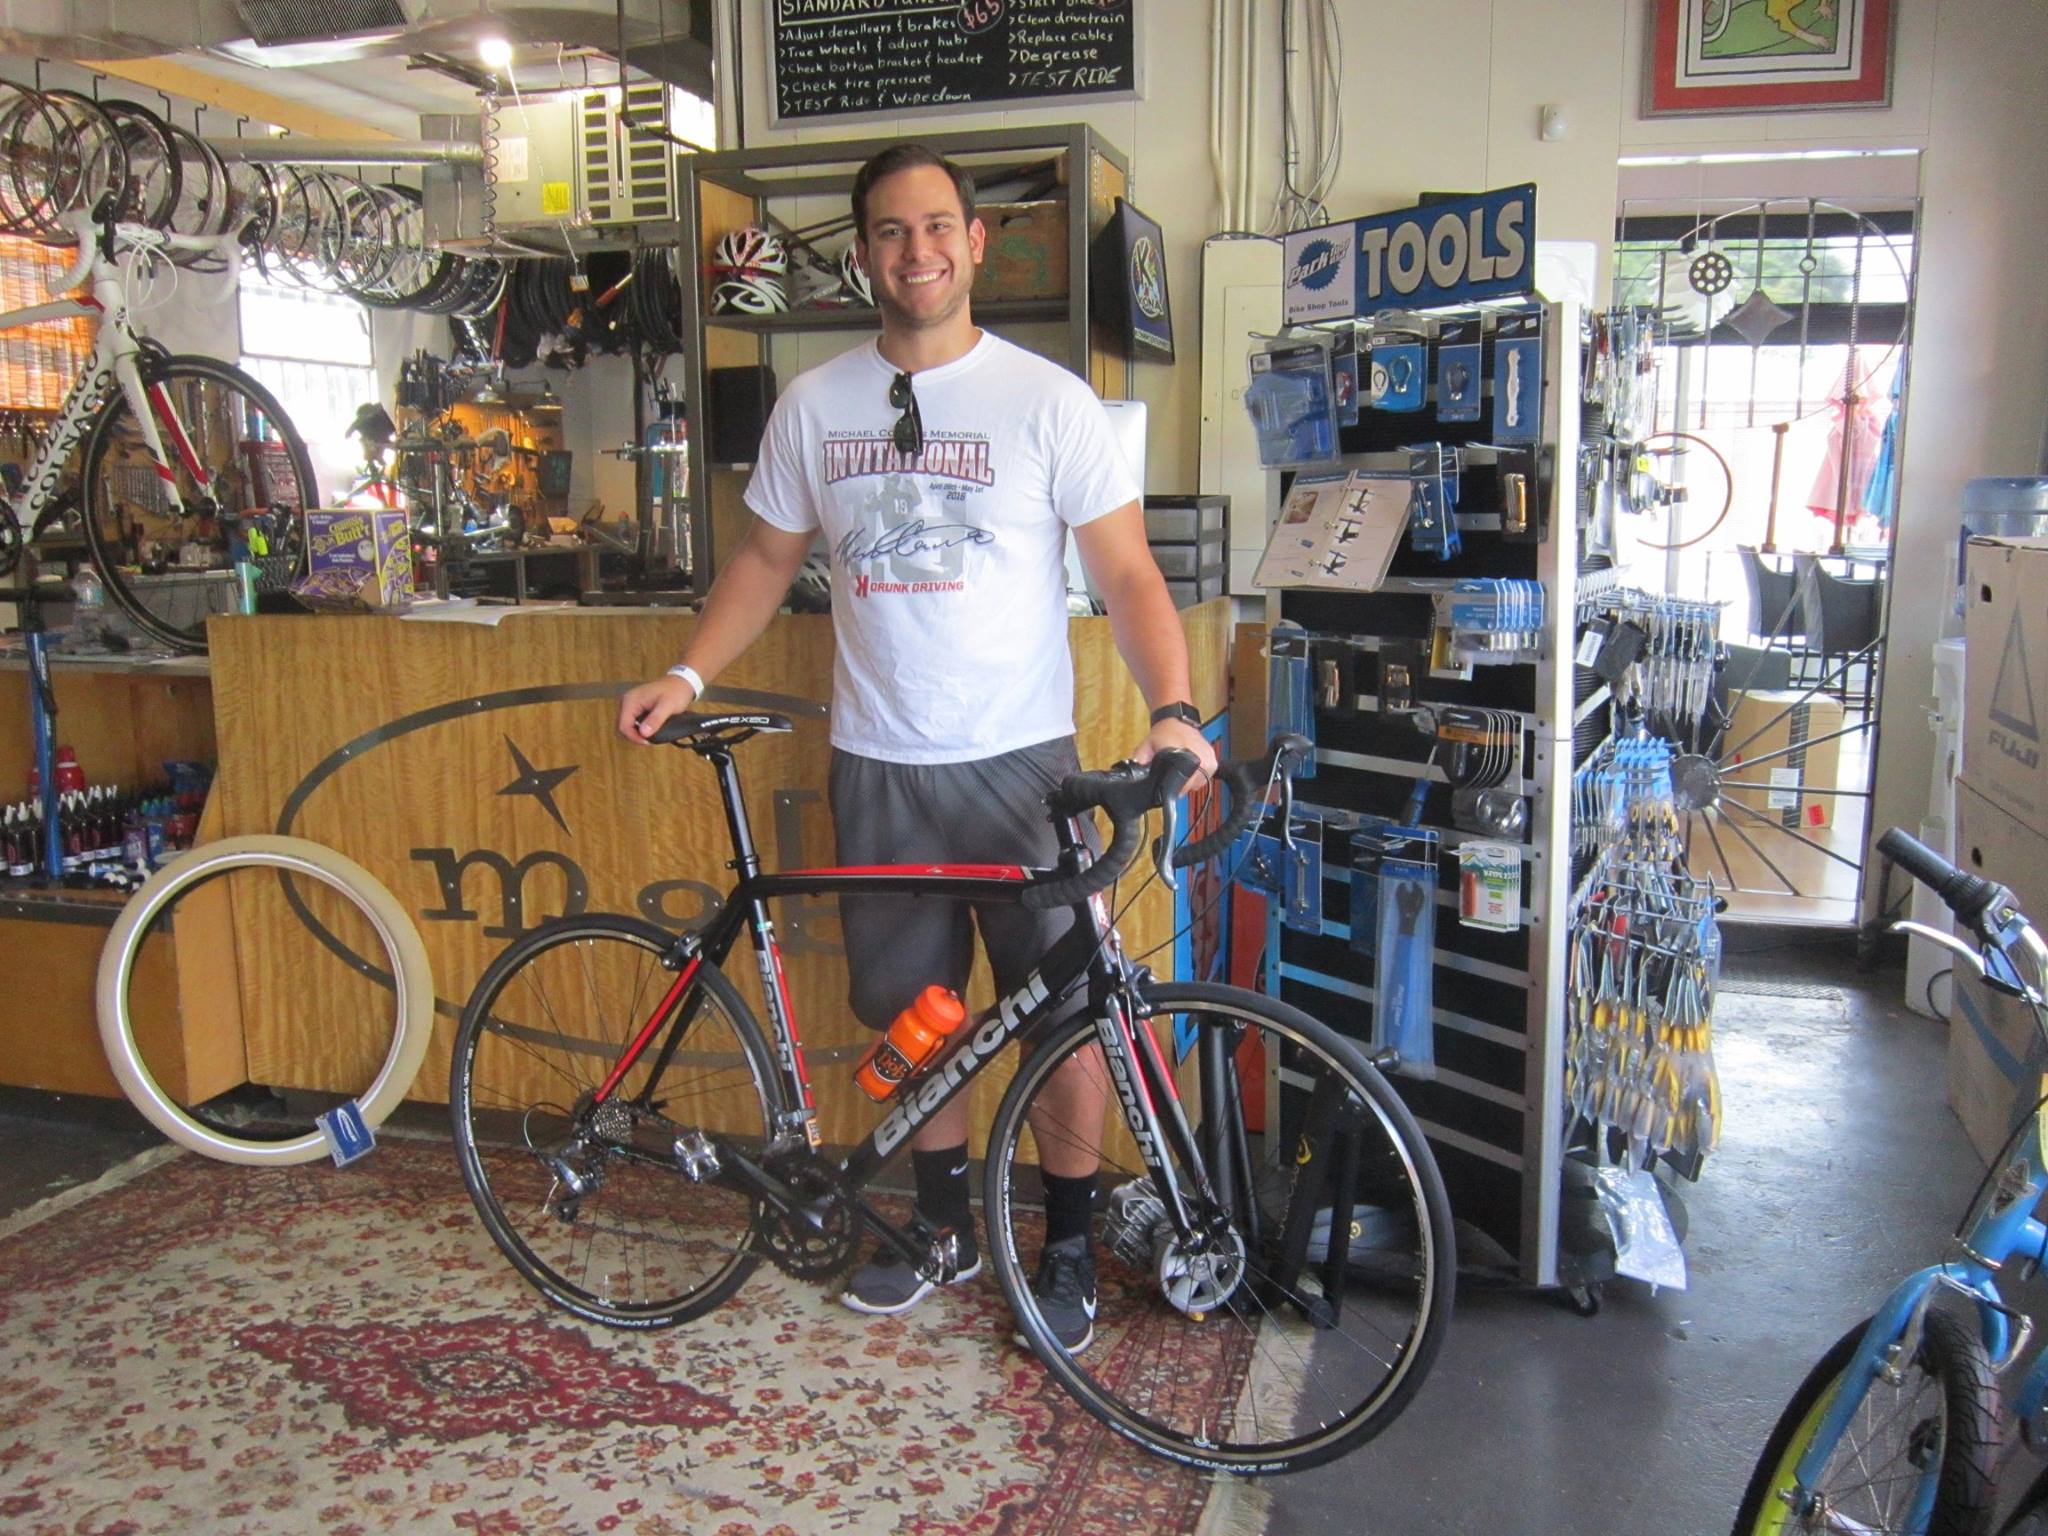 Drew with his new Bianchi Via Nirone 7. Drew jumped on his new Bianchi Bicycle and rode home. Looking Good!